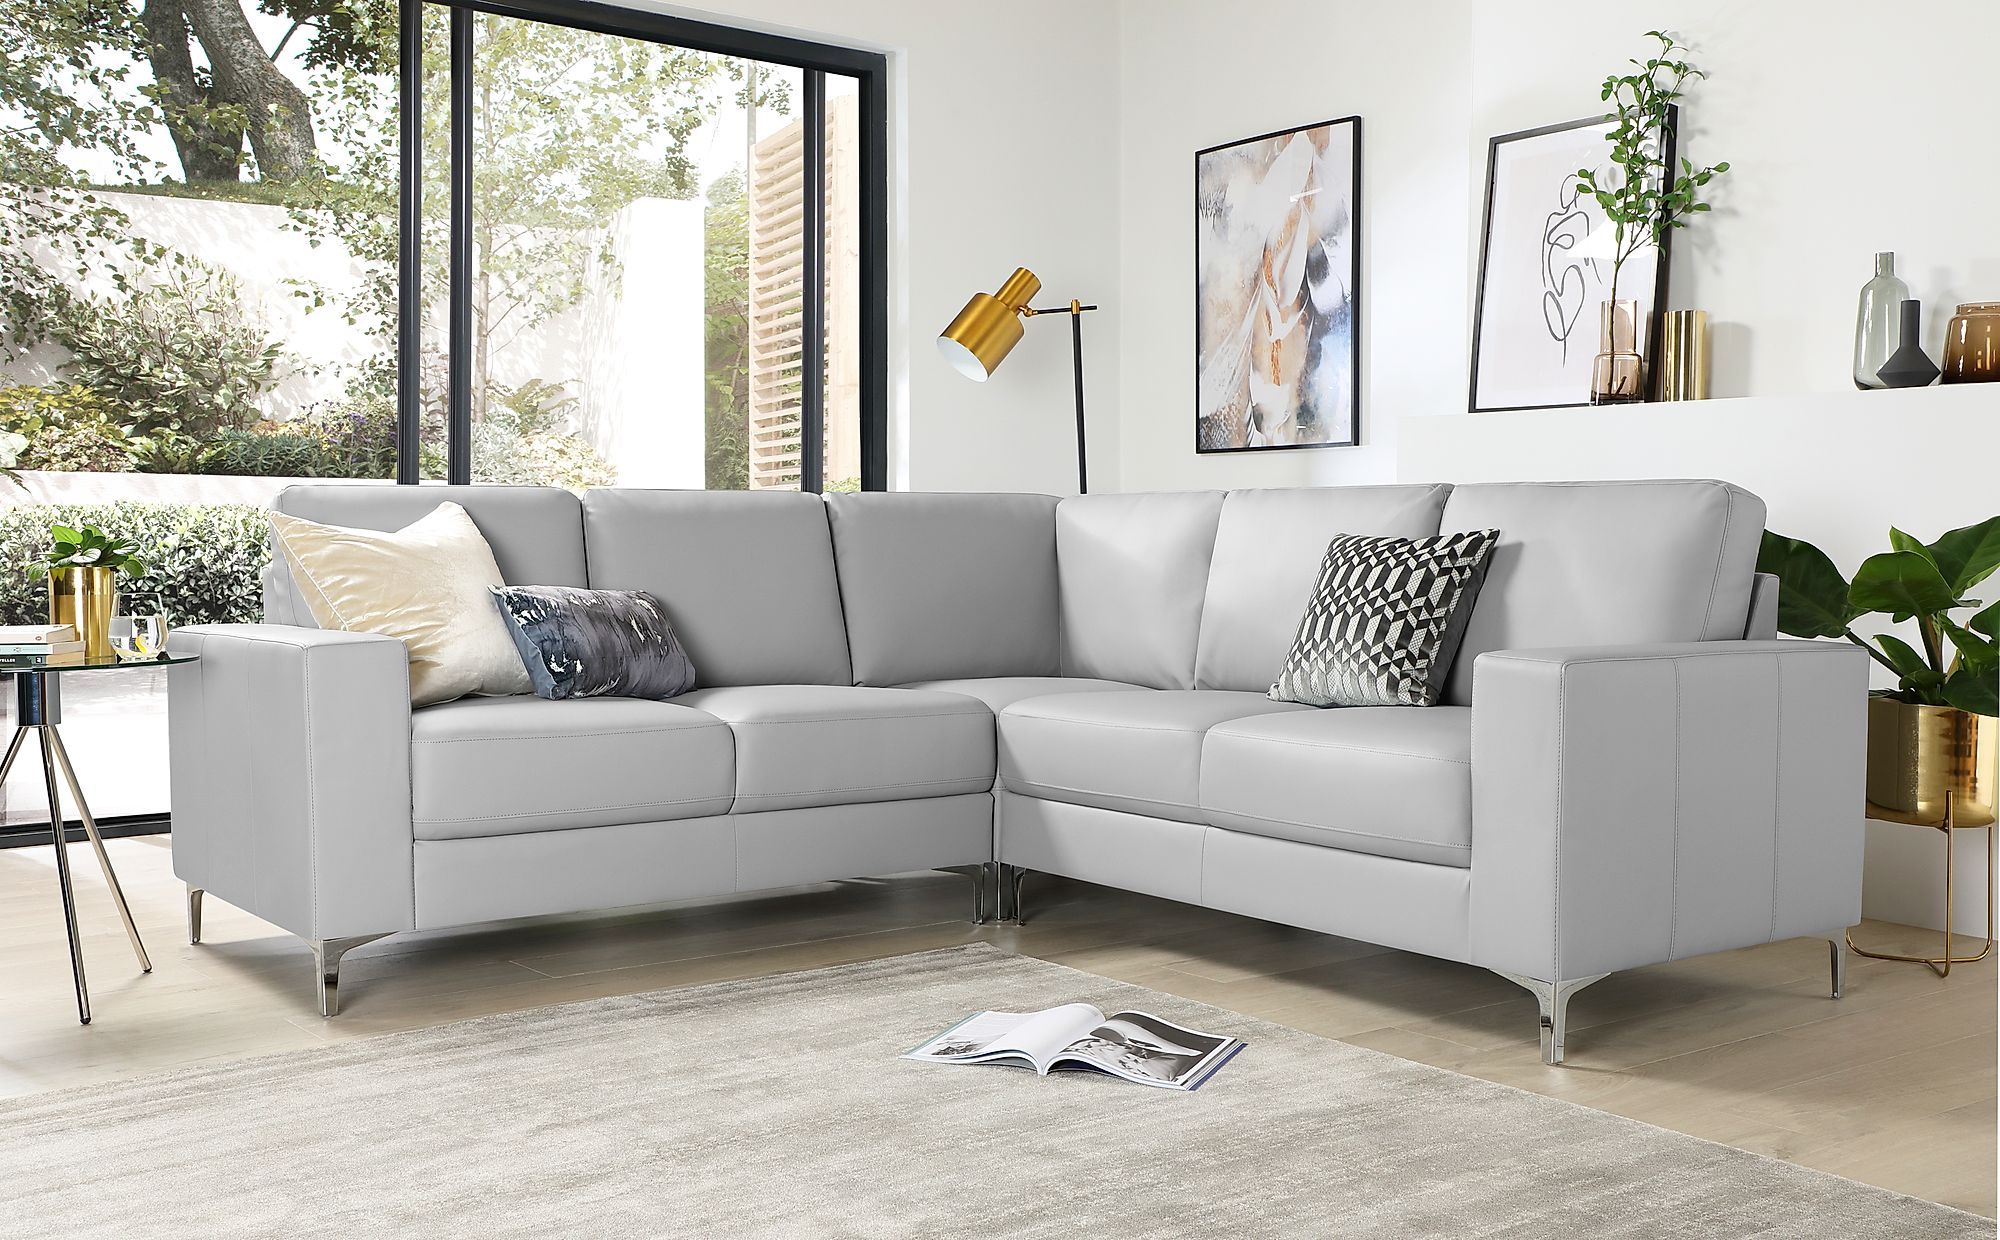 Baltimore Light Grey Leather Corner Sofa | Furniture Choice Throughout Sofas In Light Grey (Gallery 13 of 20)